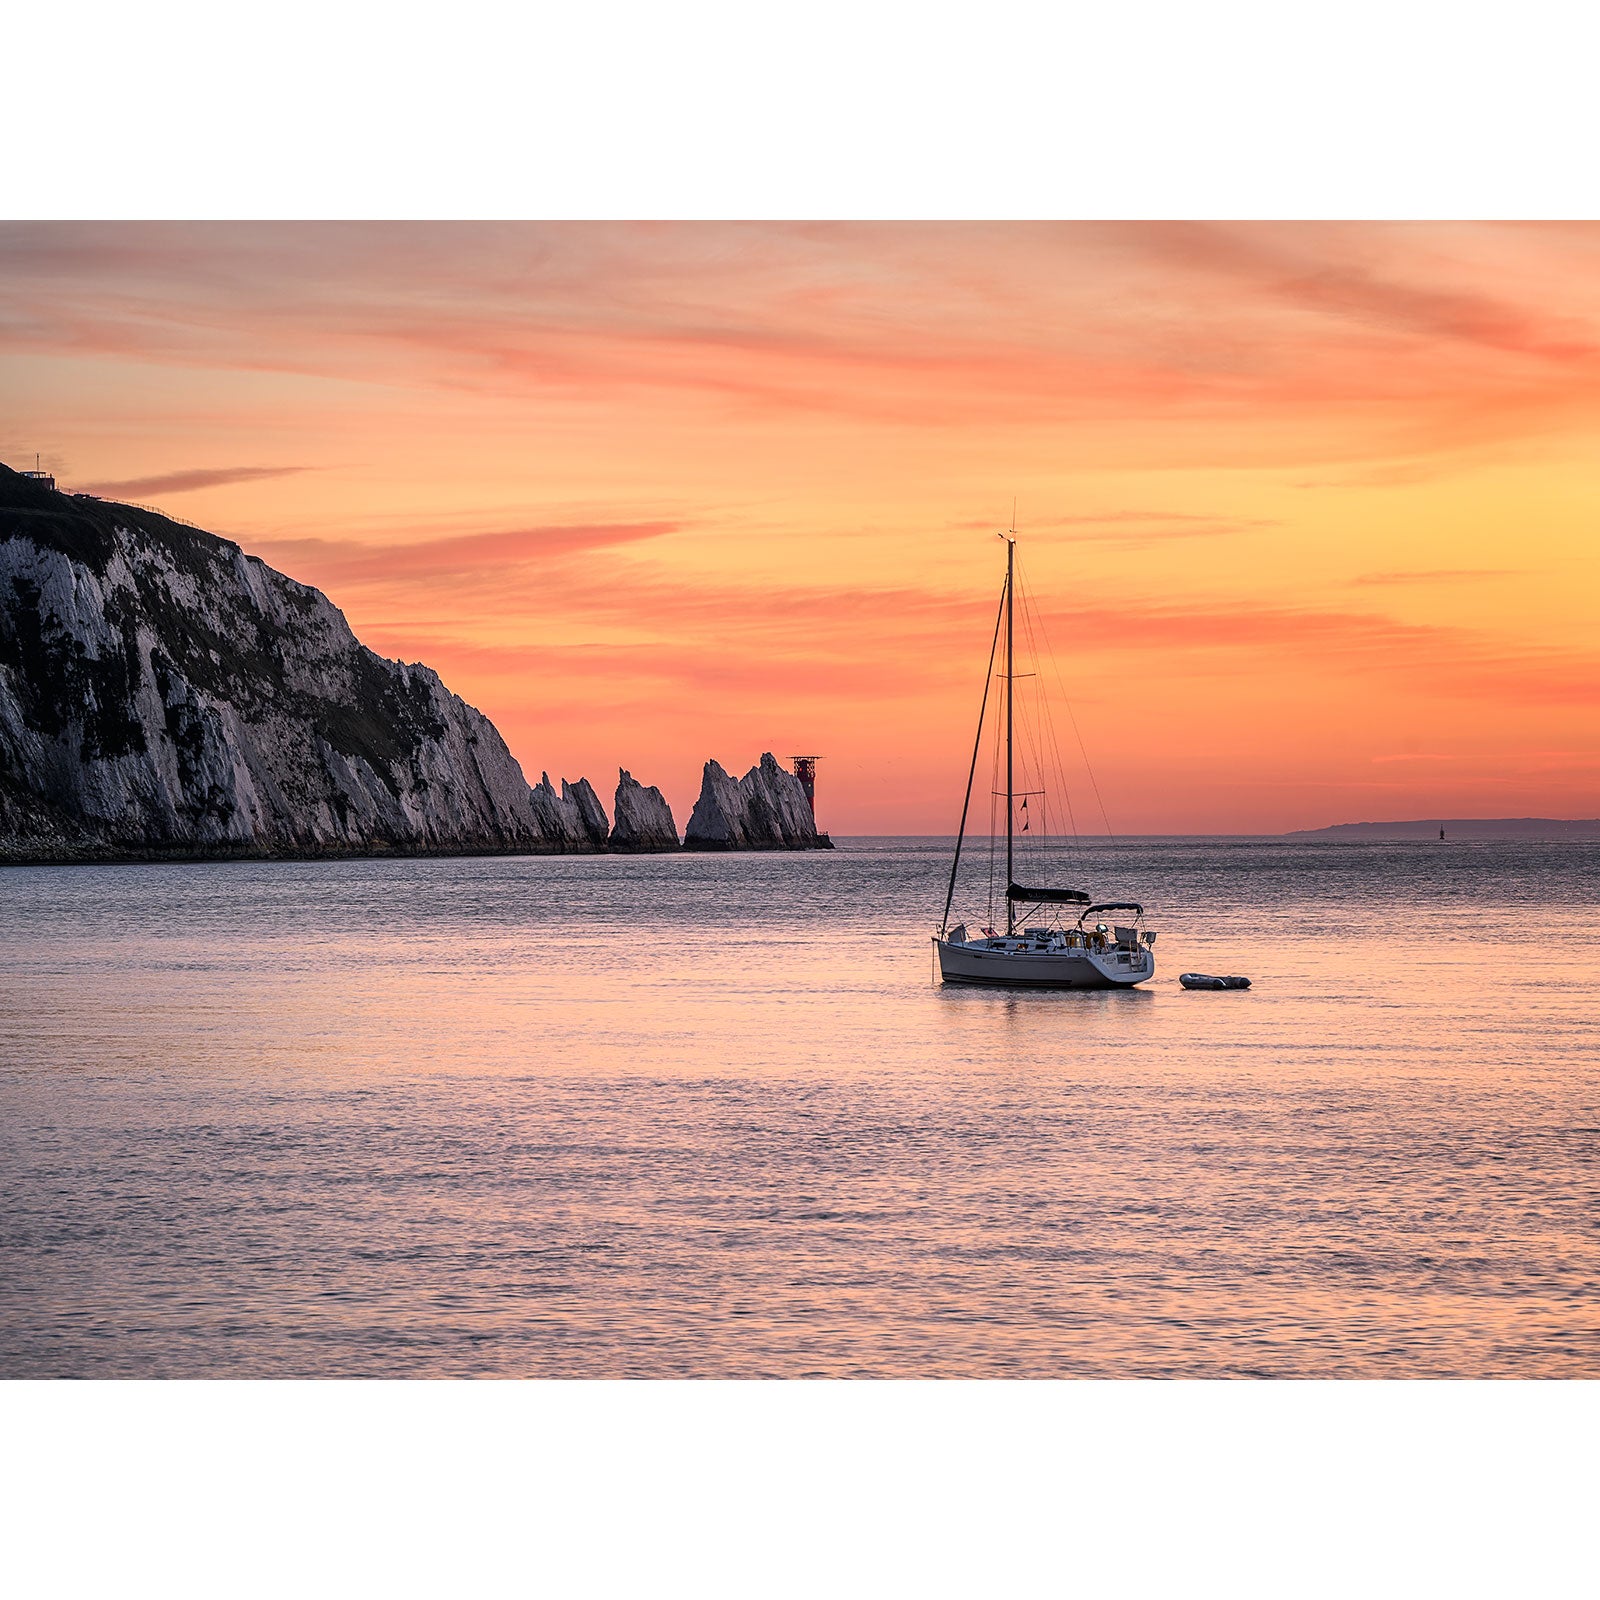 Sailboat anchored near a cliff at sunset on the Isle of Wight featuring The Needles by Available Light Photography.